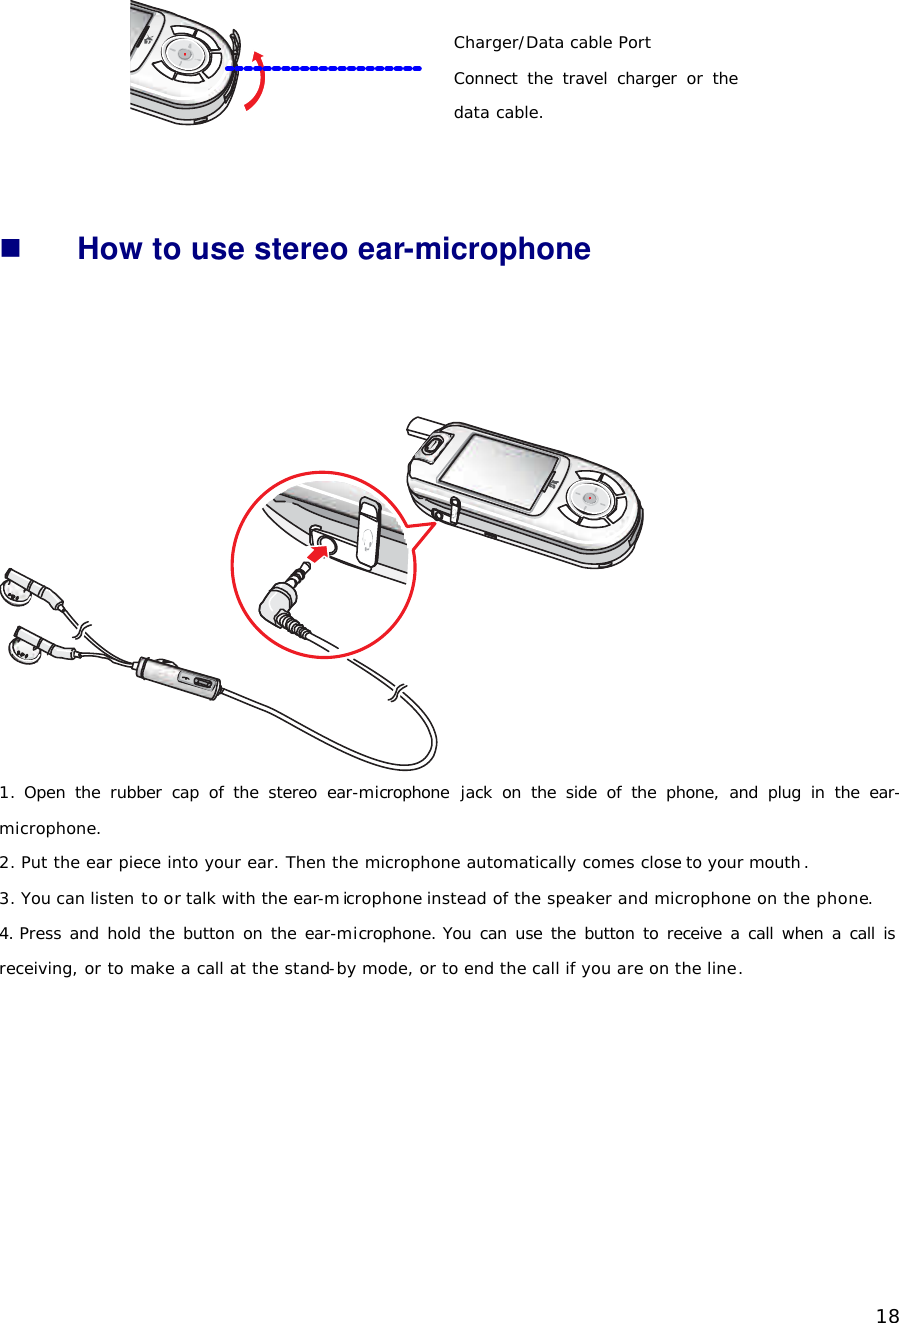   18   n How to use stereo ear-microphone    1. Open the rubber cap of the stereo ear-microphone jack on the side of the phone, and plug in the ear-microphone.  2. Put the ear piece into your ear. Then the microphone automatically comes close to your mouth. 3. You can listen to or talk with the ear-microphone instead of the speaker and microphone on the phone. 4. Press and hold the button on the ear-microphone. You can use the button to receive a call when a call is receiving, or to make a call at the stand-by mode, or to end the call if you are on the line.   Charger/Data cable Port   Connect the travel charger or the data cable.  